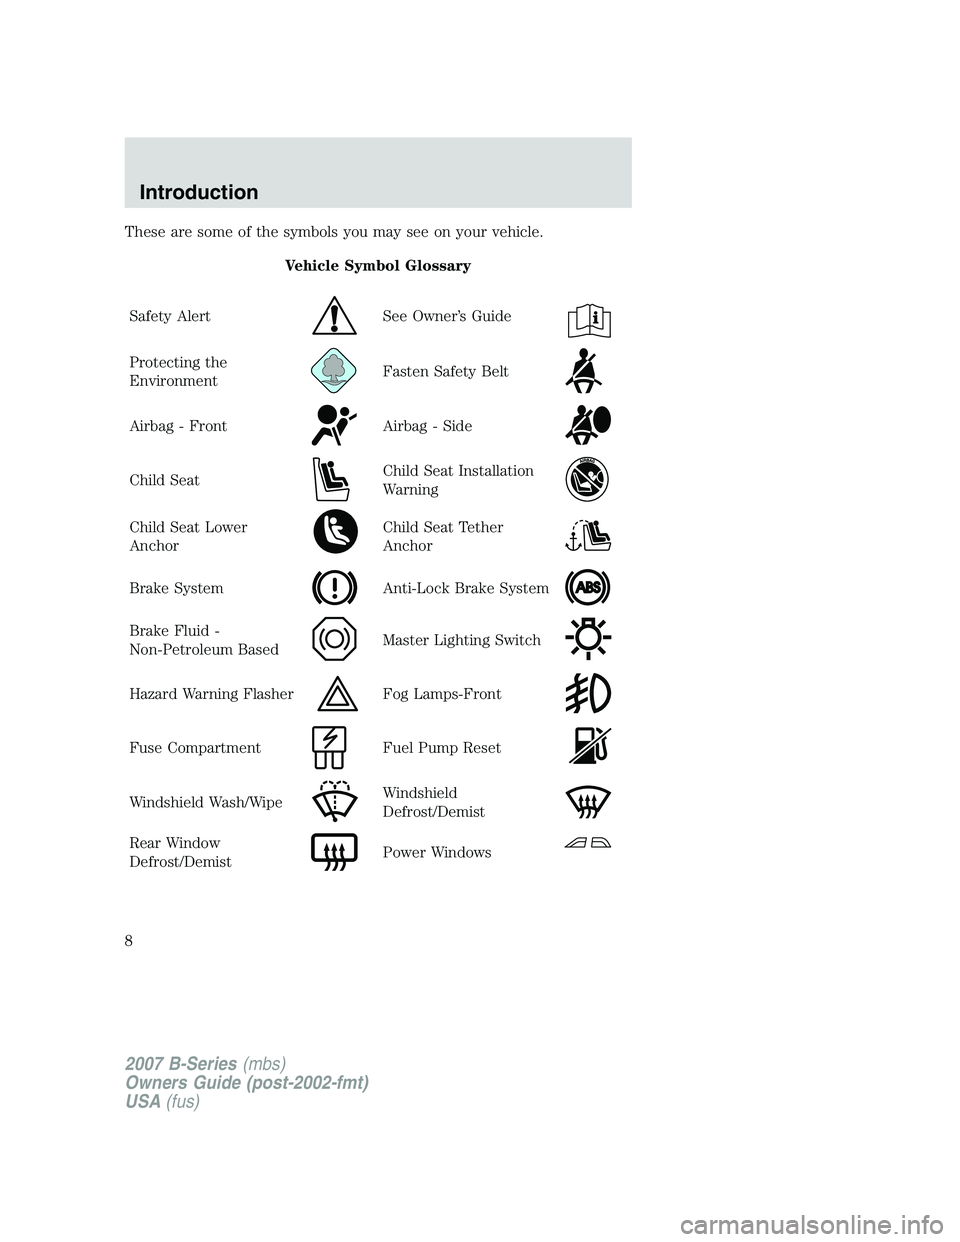 MAZDA MODEL B3000 TRUCK 2007  Owners Manual These are some of the symbols you may see on your vehicle.Vehicle Symbol Glossary
Safety Alert
See Owner’s Guide
Protecting the
EnvironmentFasten Safety Belt
Airbag - FrontAirbag - Side
Child SeatCh